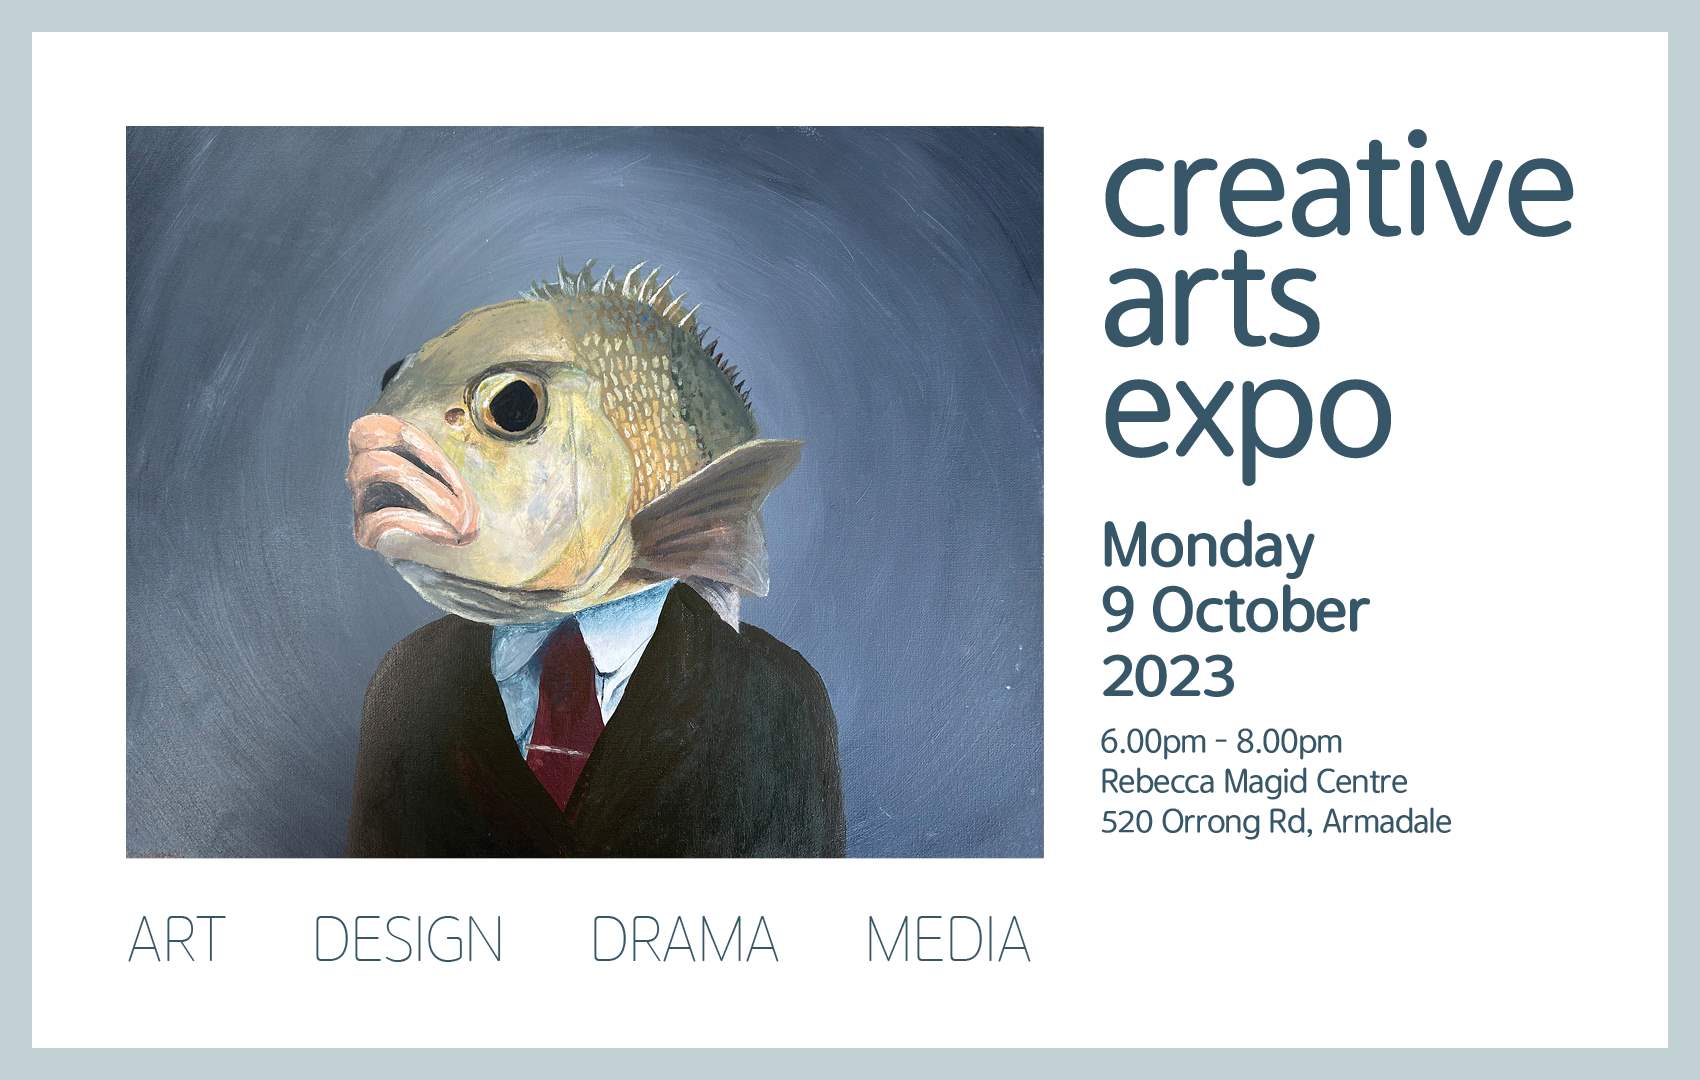 This image shows a drawing of a fish head on a human body wearing a business suit and tie. Next to this is the text 'Creative Arts Expo' which will be on Monday 9 October.